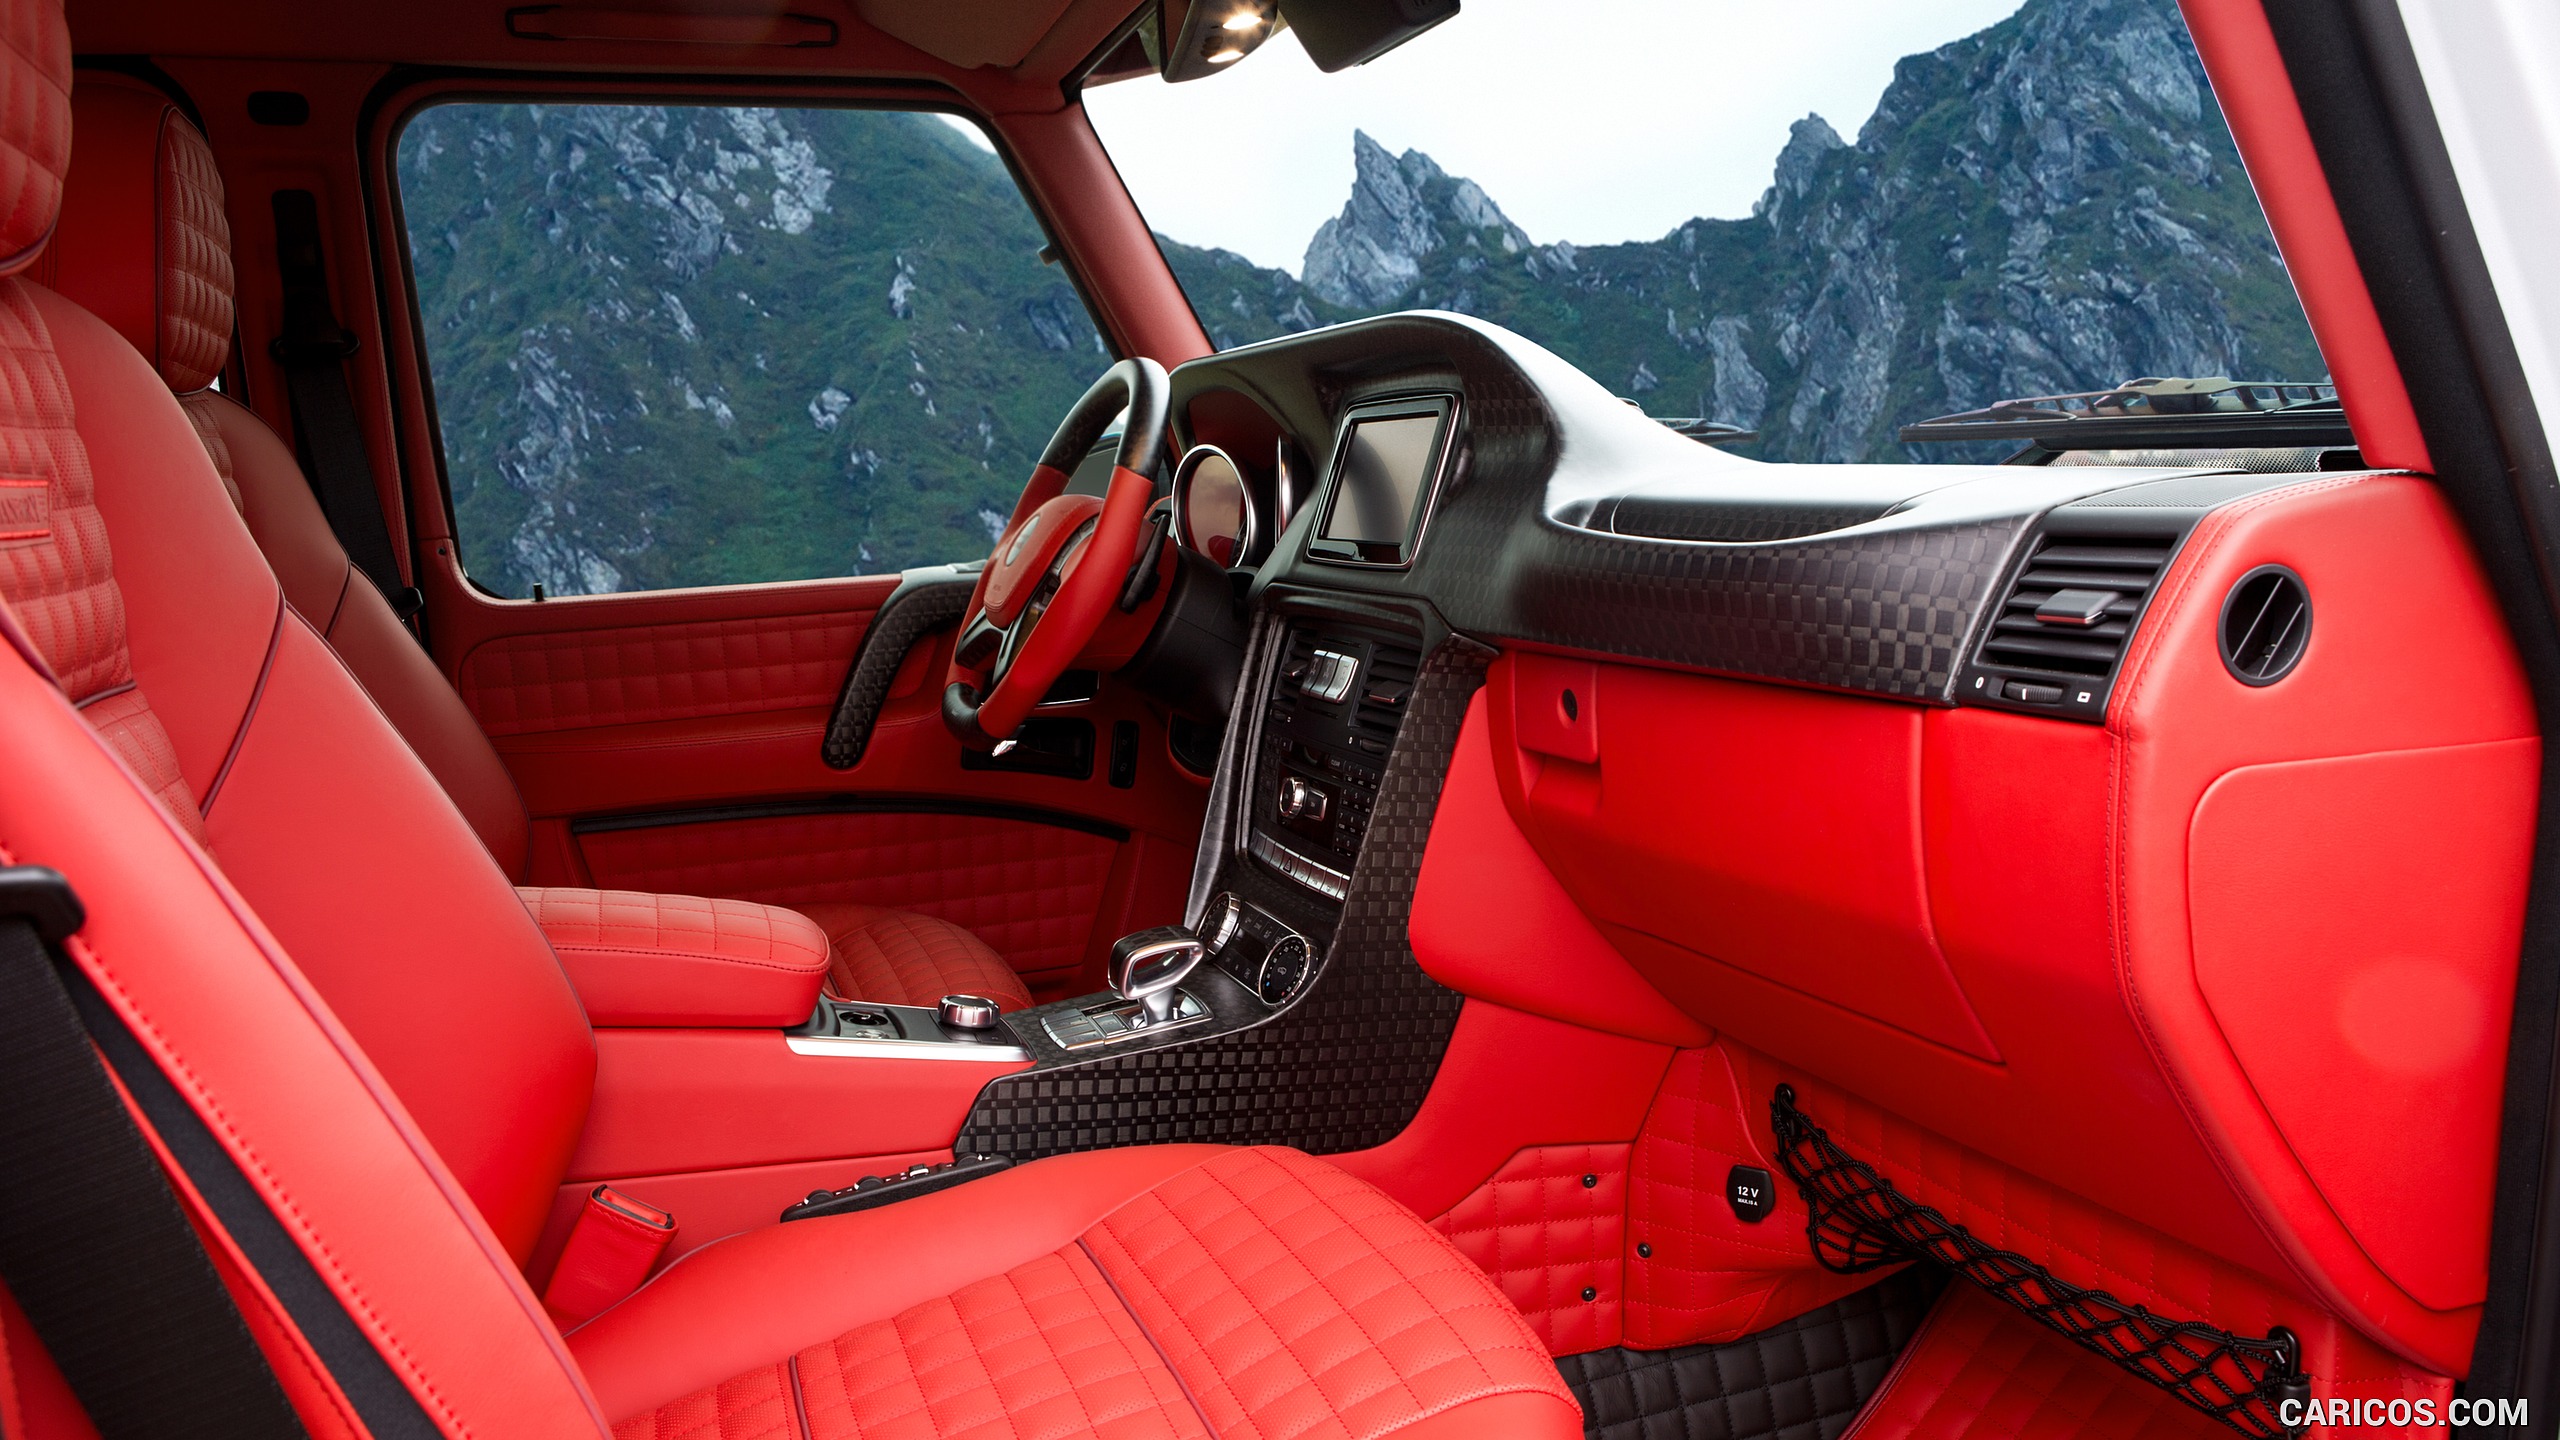 2016 MANSORY GRONOS Facelift based on Mercedes-AMG G63 - Interior, Front Seats, #6 of 7